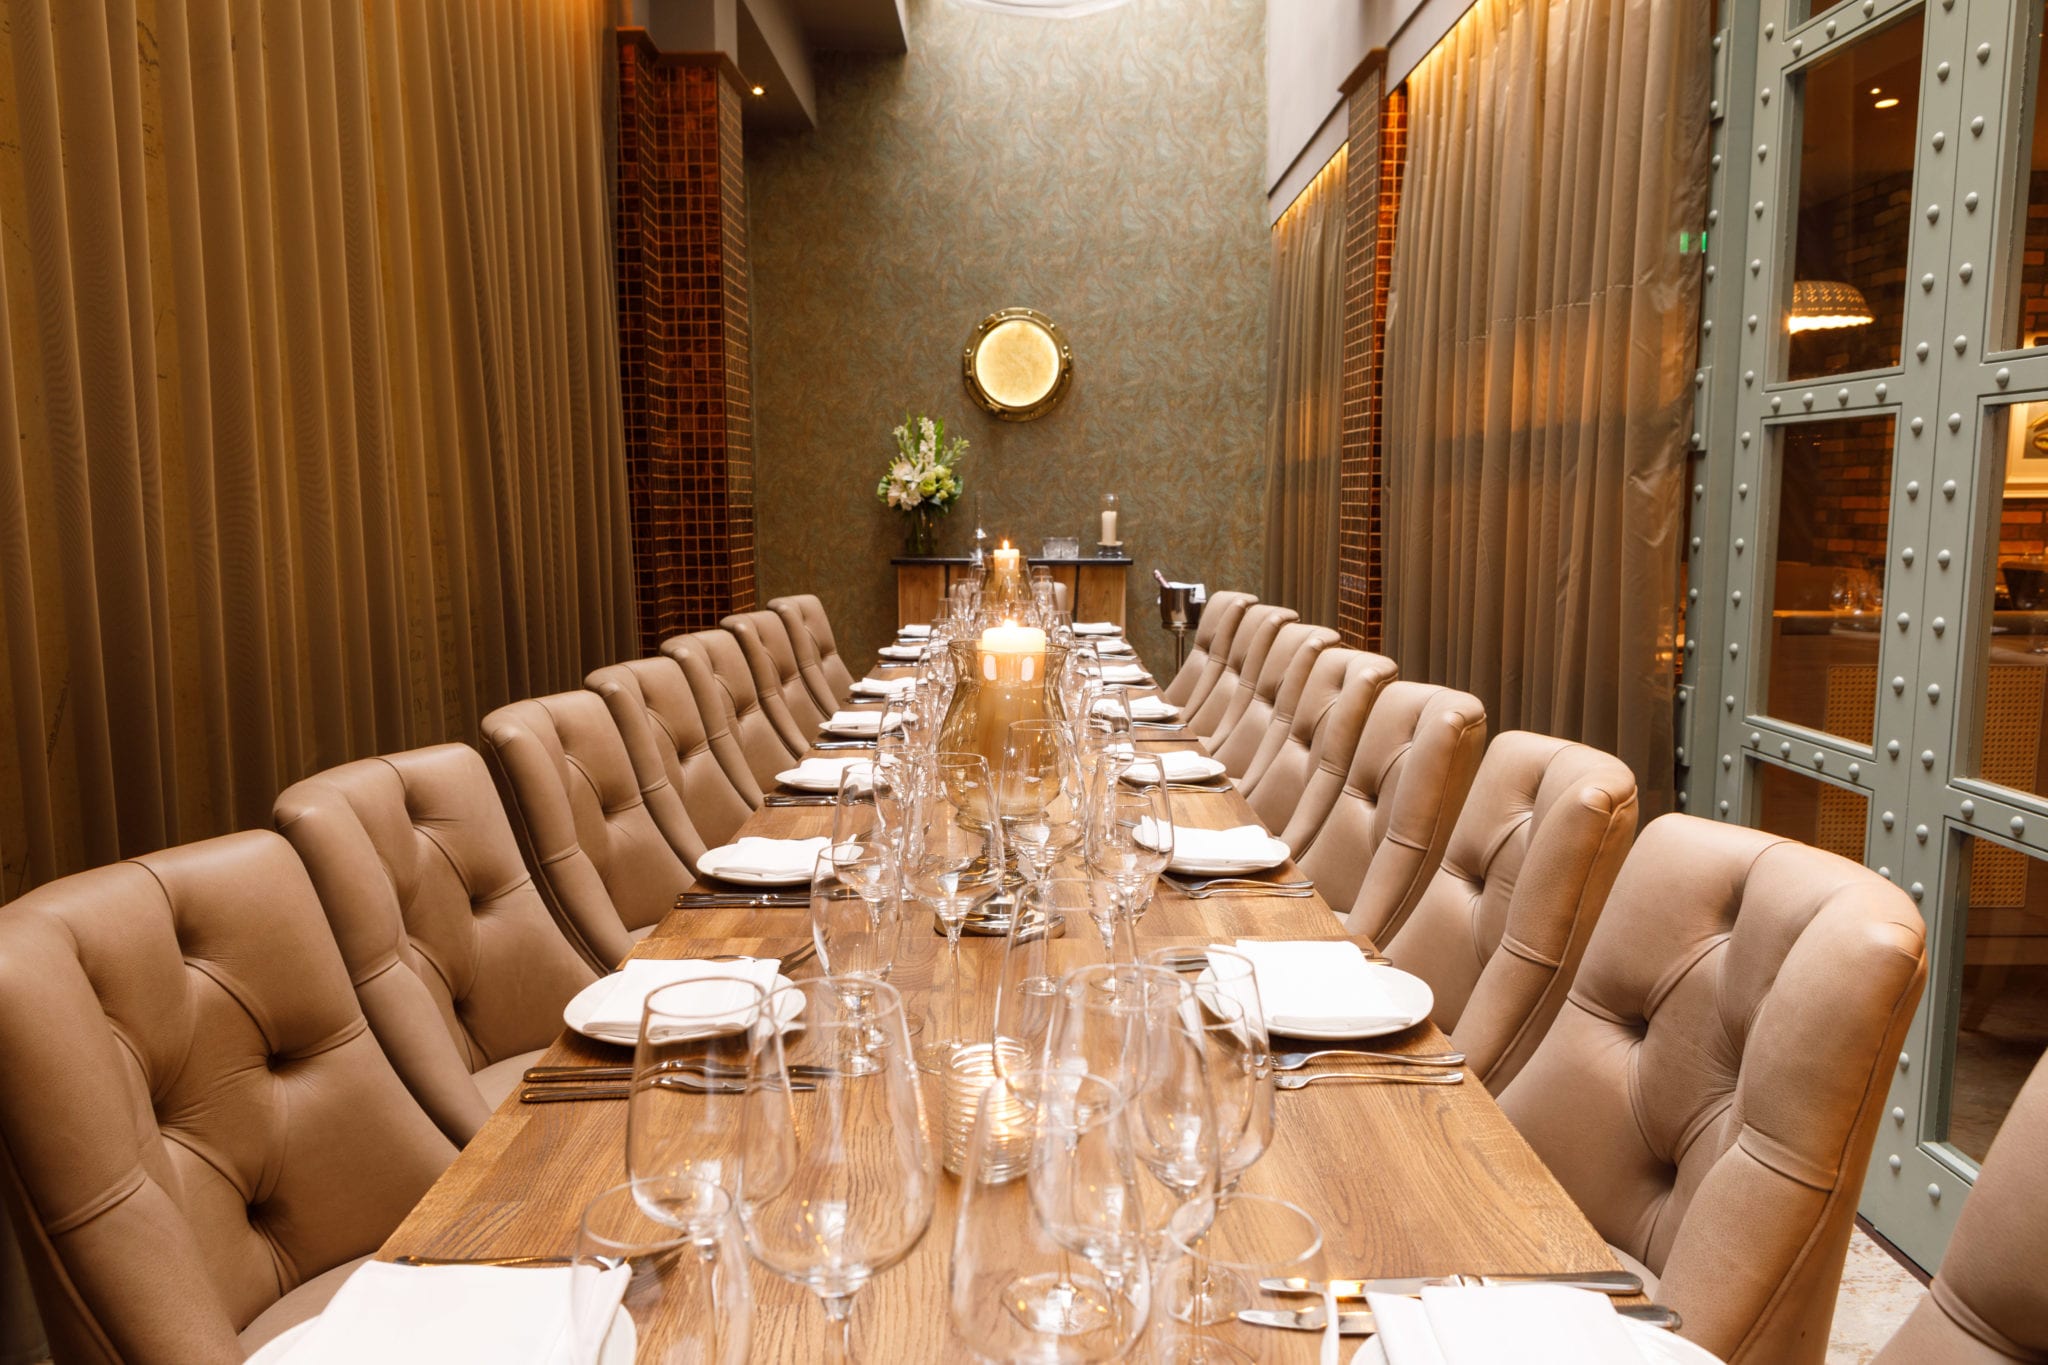 Restaurant Catering Contract Private Dining Room Policies